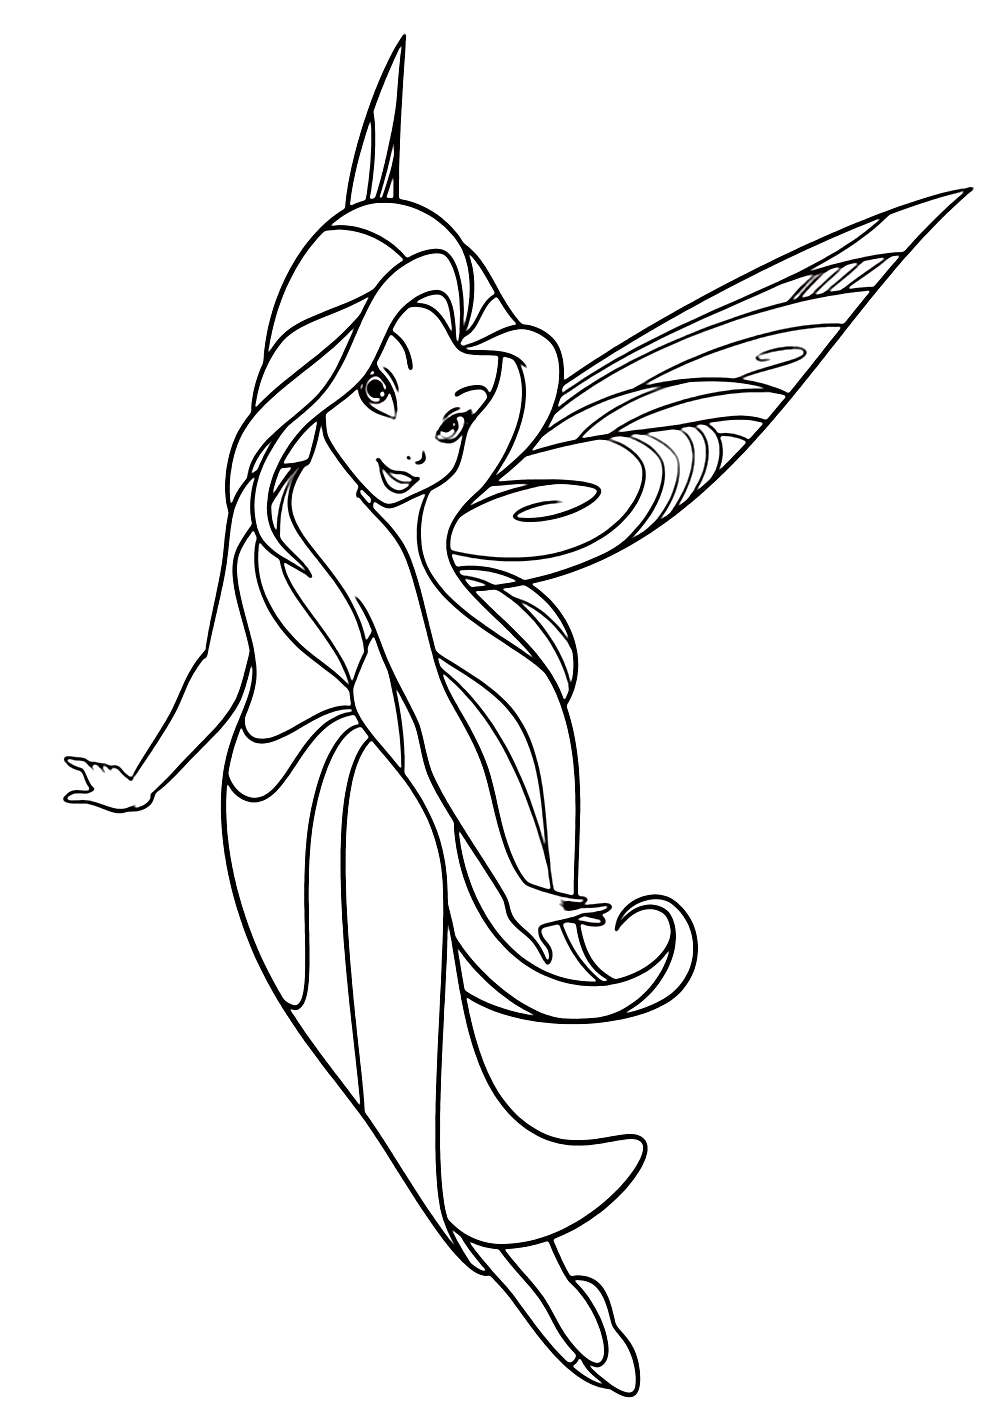 Coloring Page of Fairy from Tinkerbell